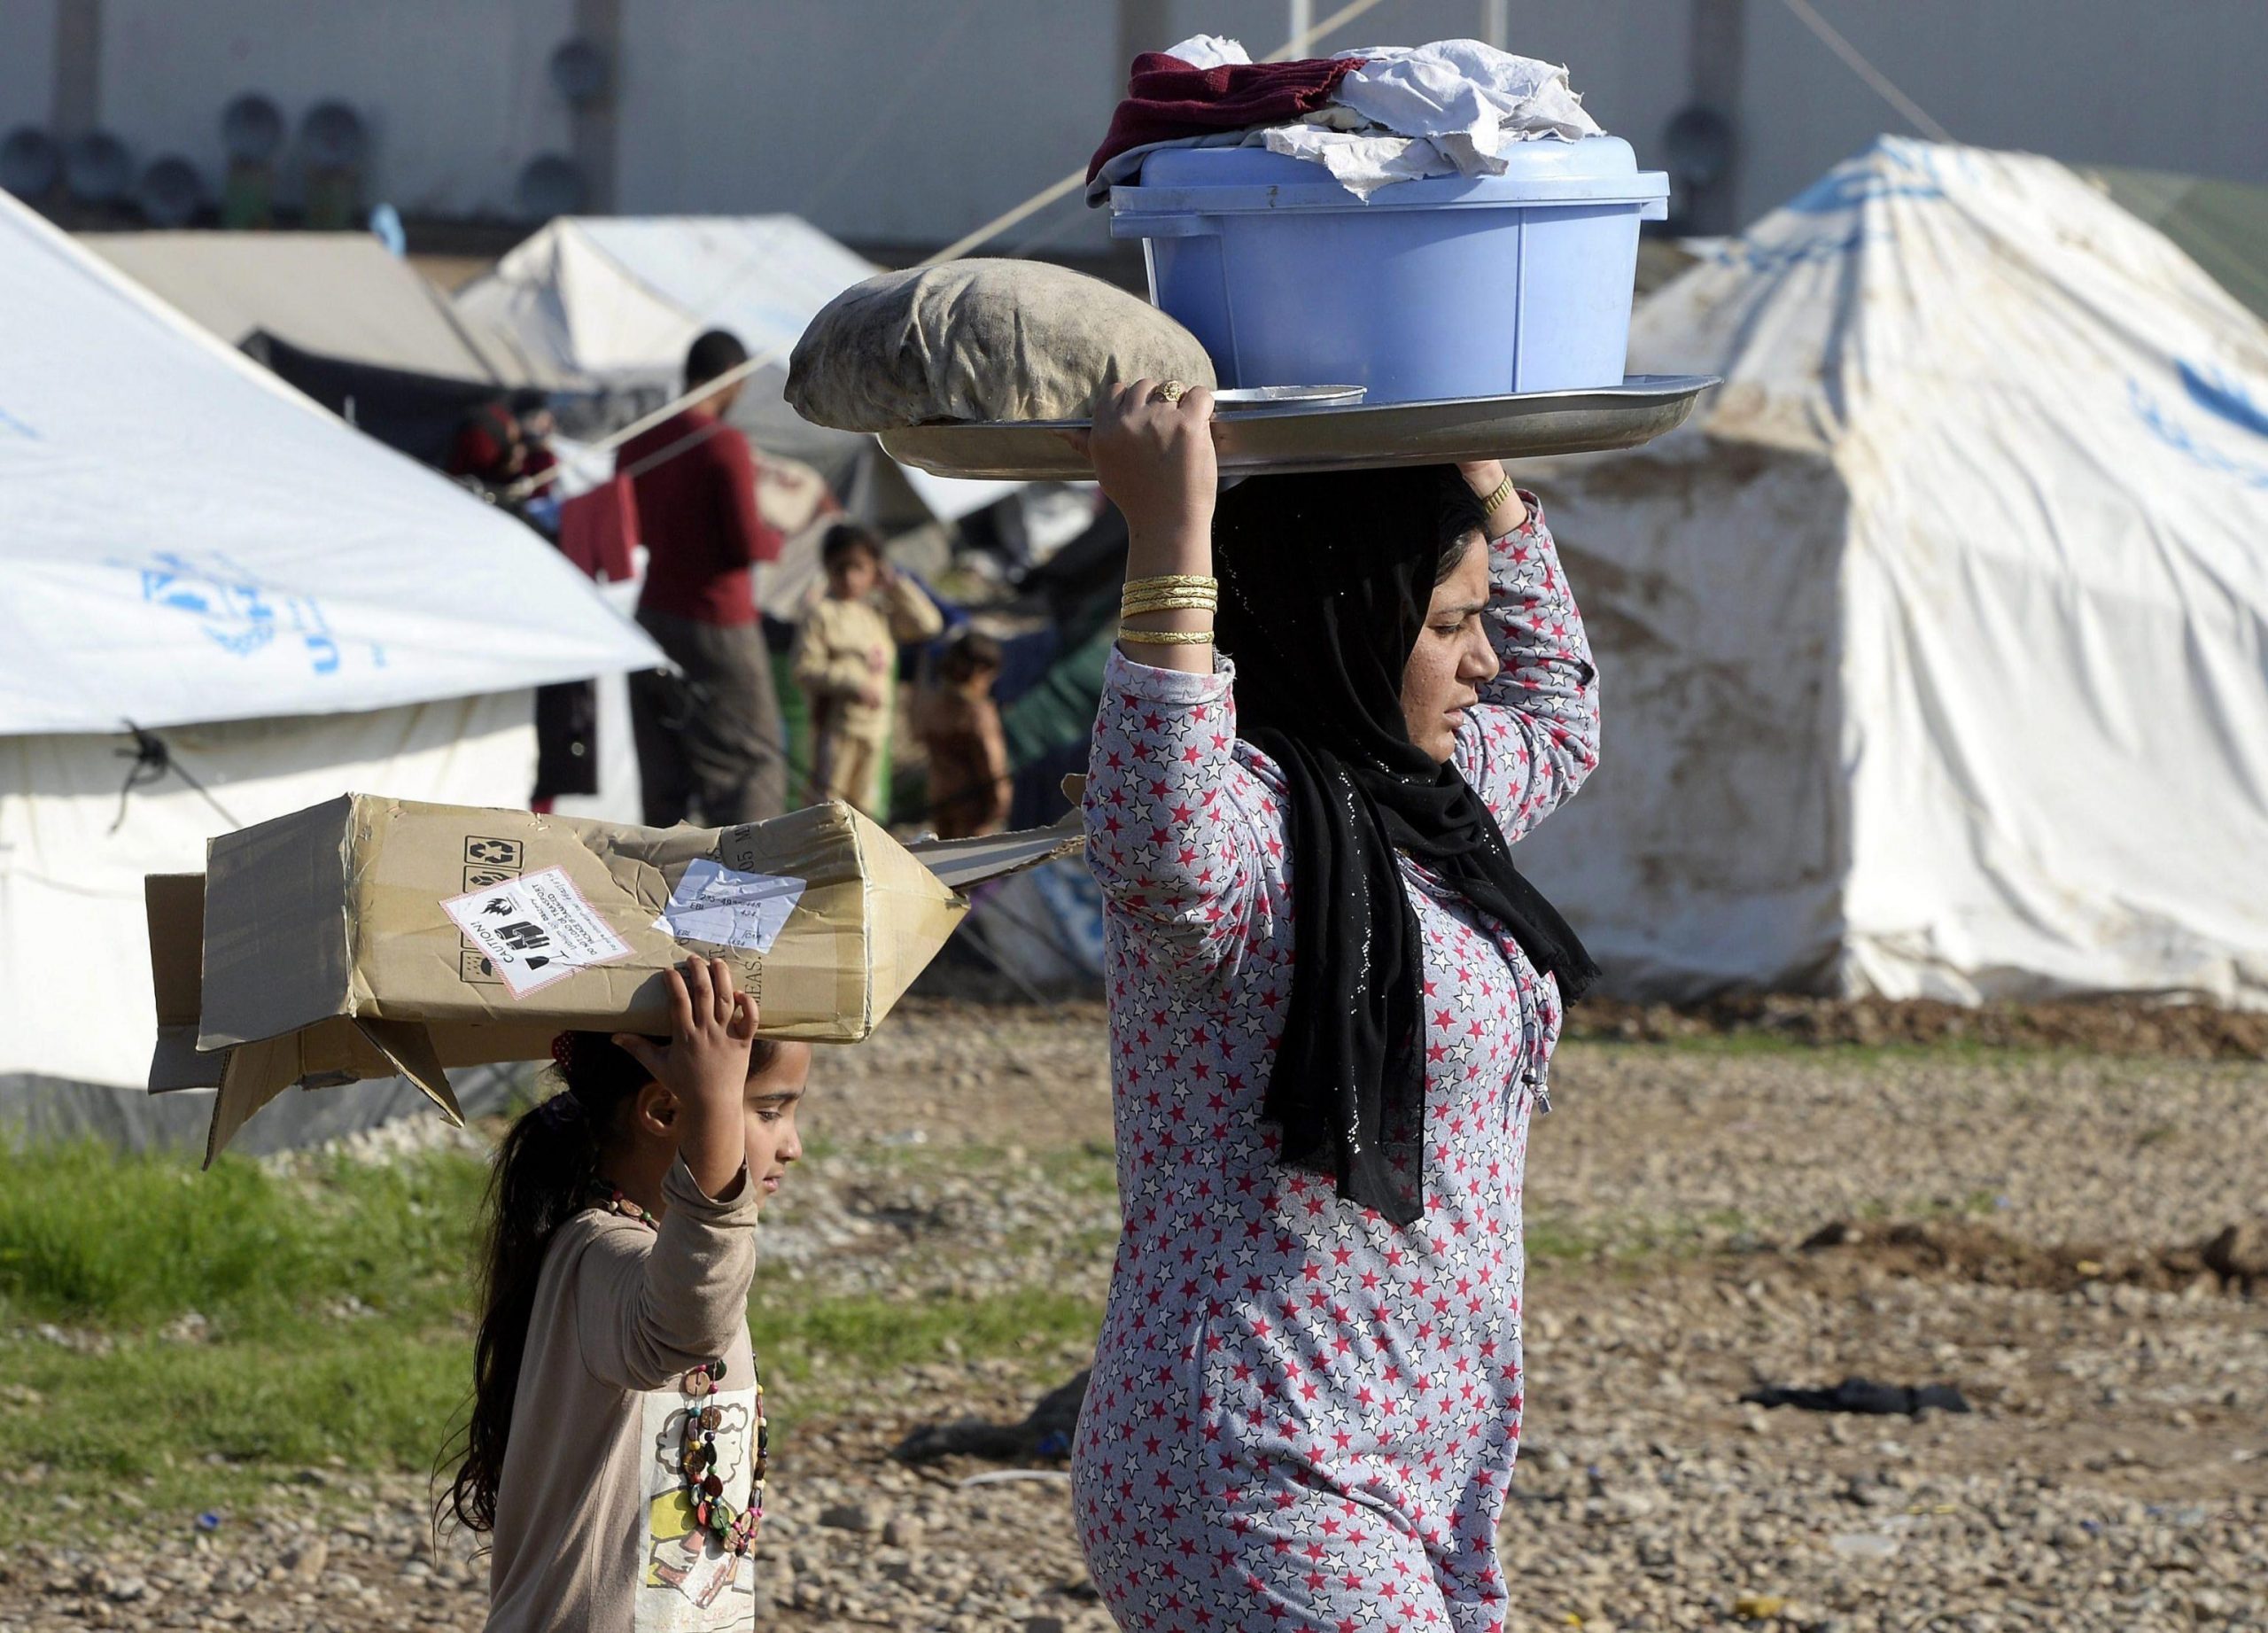 epa04524894 A Yazidi woman and child transport laundry on their heads at the Baharka refugee camp, near the capital of the Iraqi-Kurdish region Erbil, Iraq, 11 December 2014. According to reports the camp houses over 3,600 people, some of the estimated 1.5 million people of various ethnic and religious groups forced to flee their homes as fighters from the group calling themselves the Islamic State (IS) took control, many finding shelter in the predominantly Kurdish north of Iraq.  EPA/DAREK DELMANOWICZ POLAND OUT